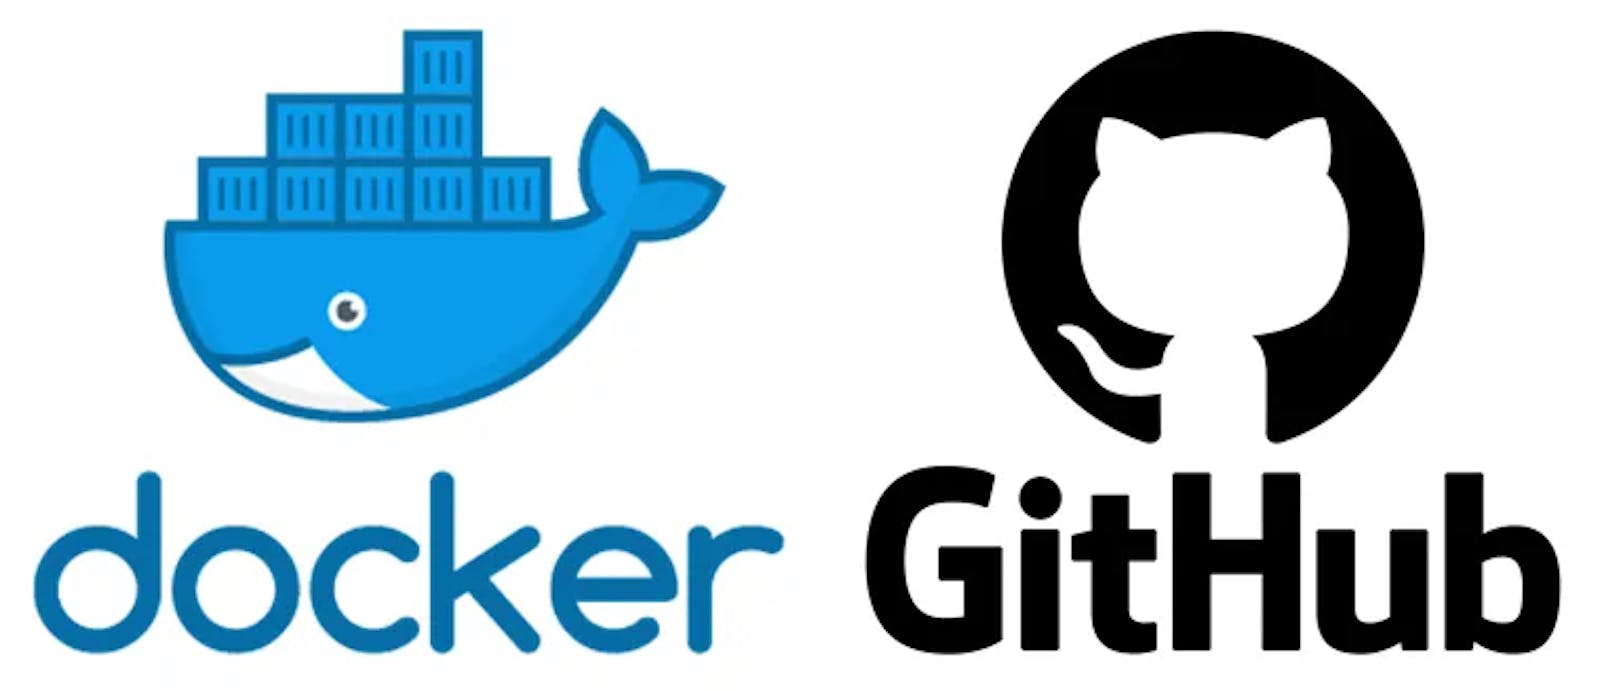 Automated Docker Image Build and Deployment with Jenkins in ec2 aws instance